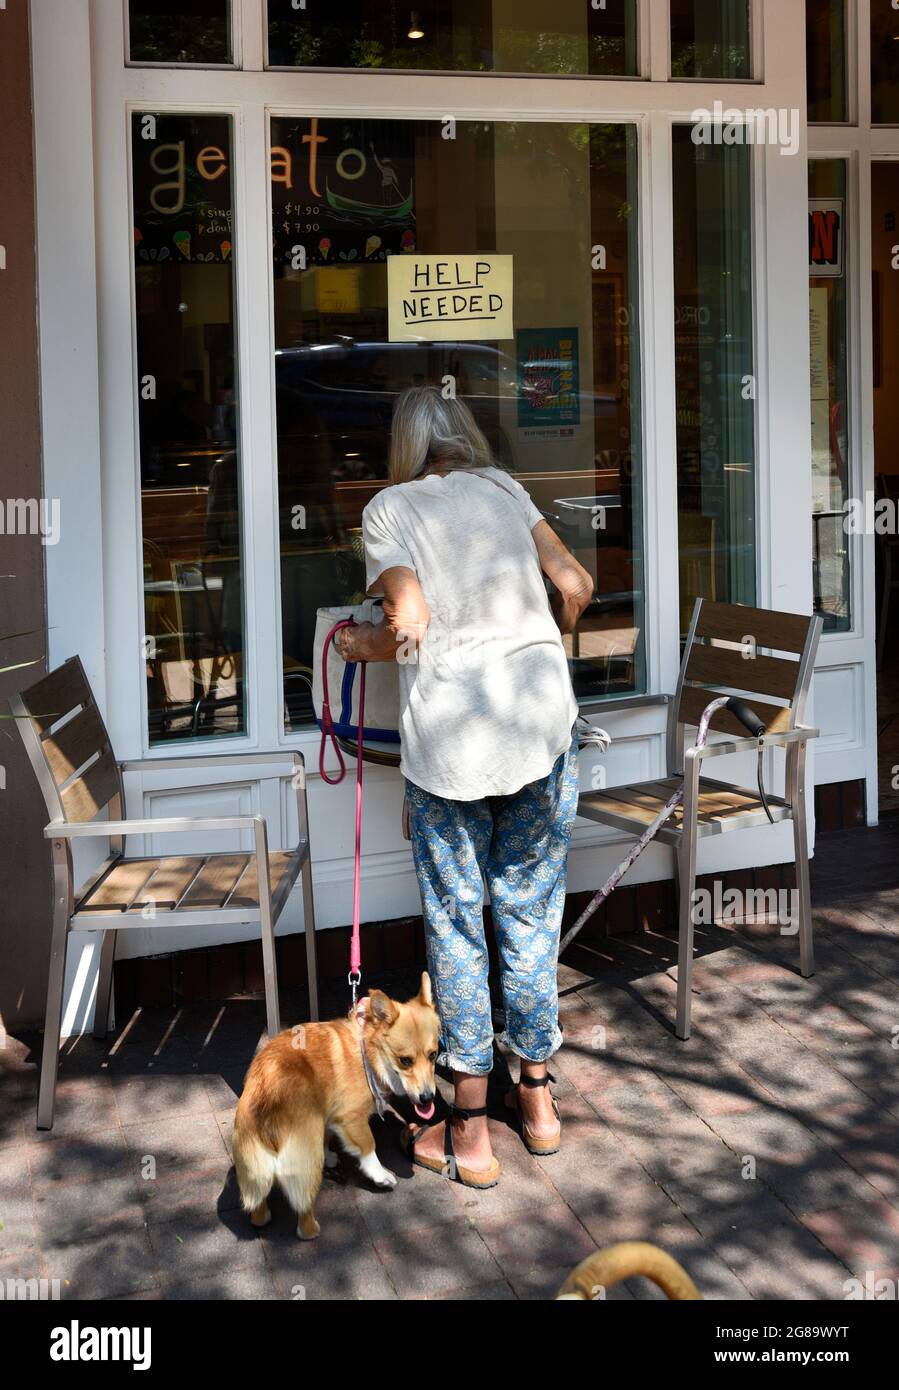 A senior woman with a dog on a leash peers through a cafe window with a 'Help Needed' sign in Santa Fe, New Mexico. Stock Photo